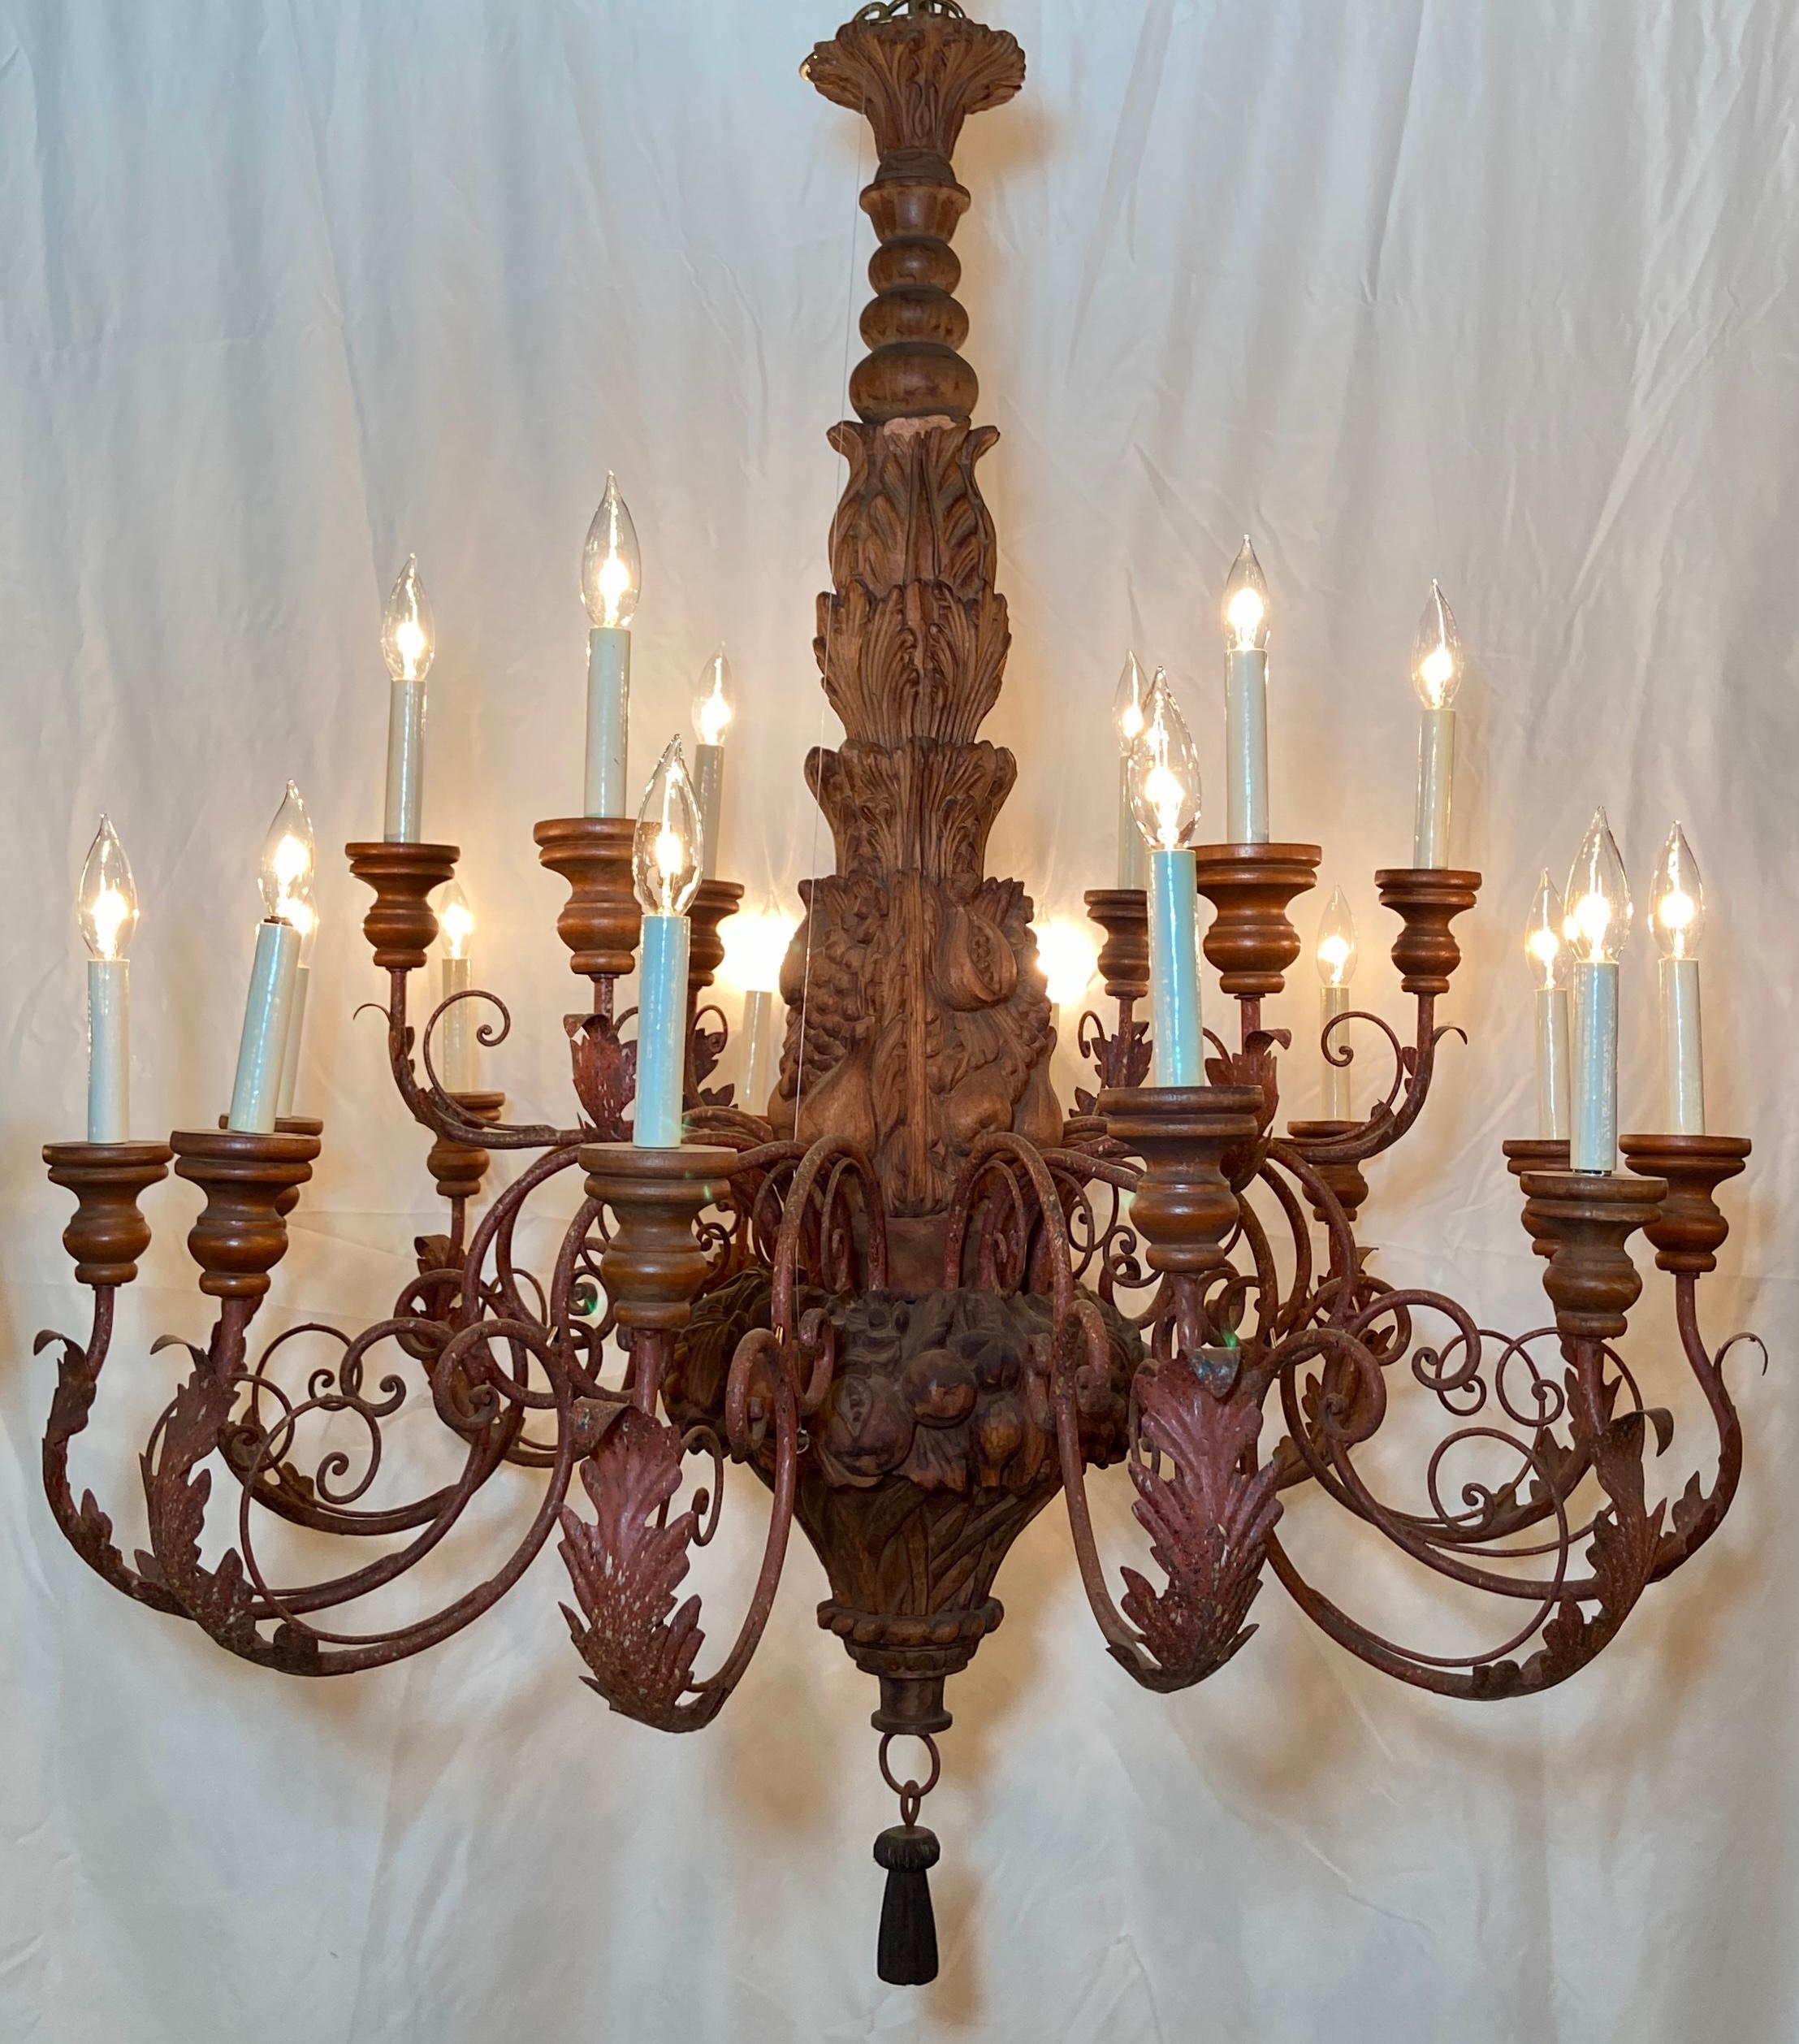 Large estate hand-carved wood and wrought iron 18-light chandelier.
Hand-carved with fruit, grape bunches and leaves.